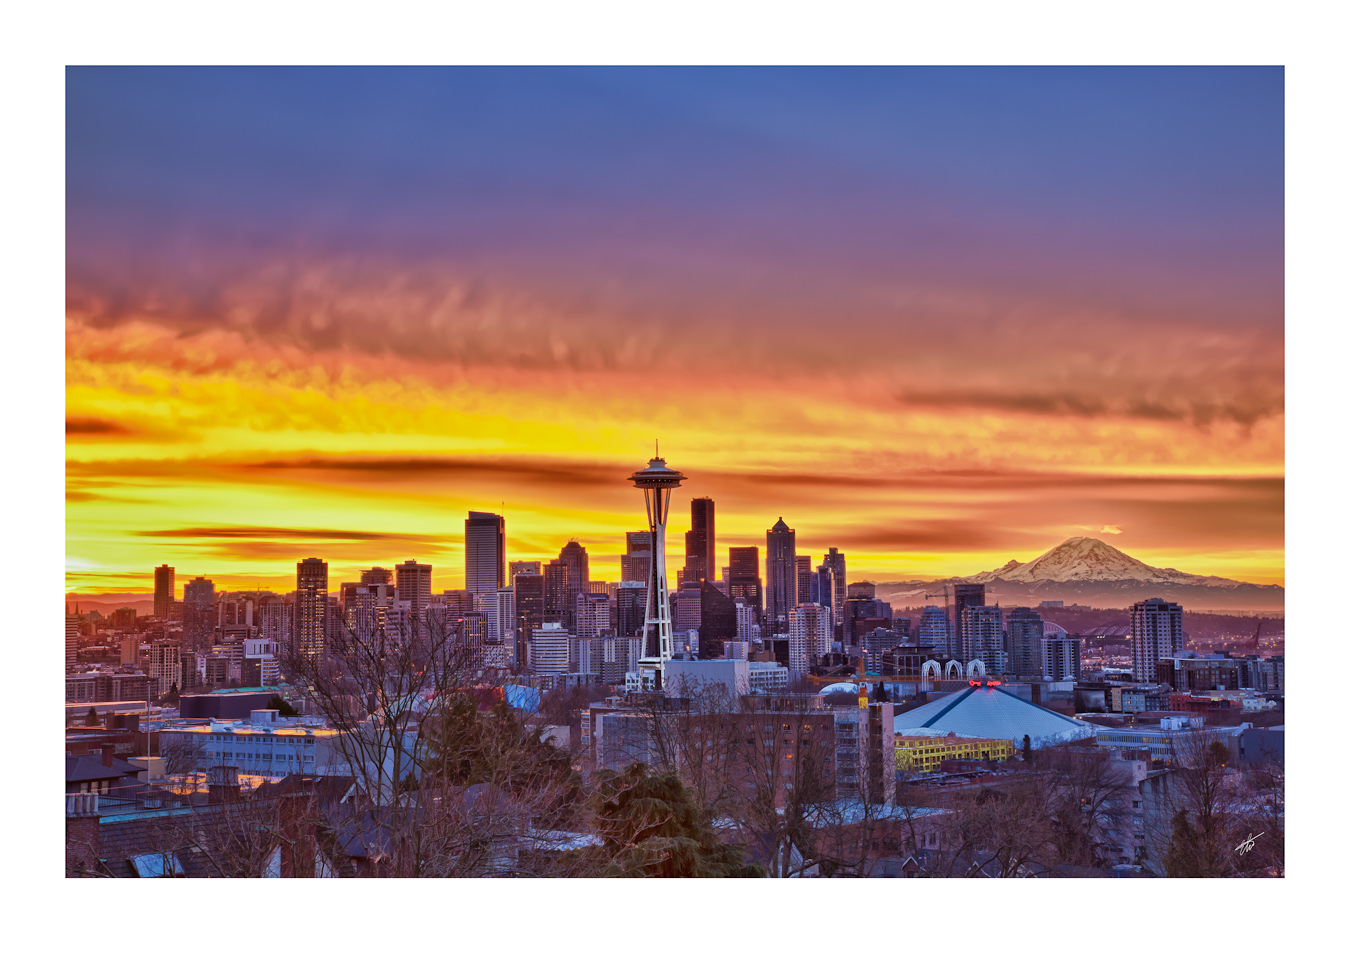 Kerry park on fire.